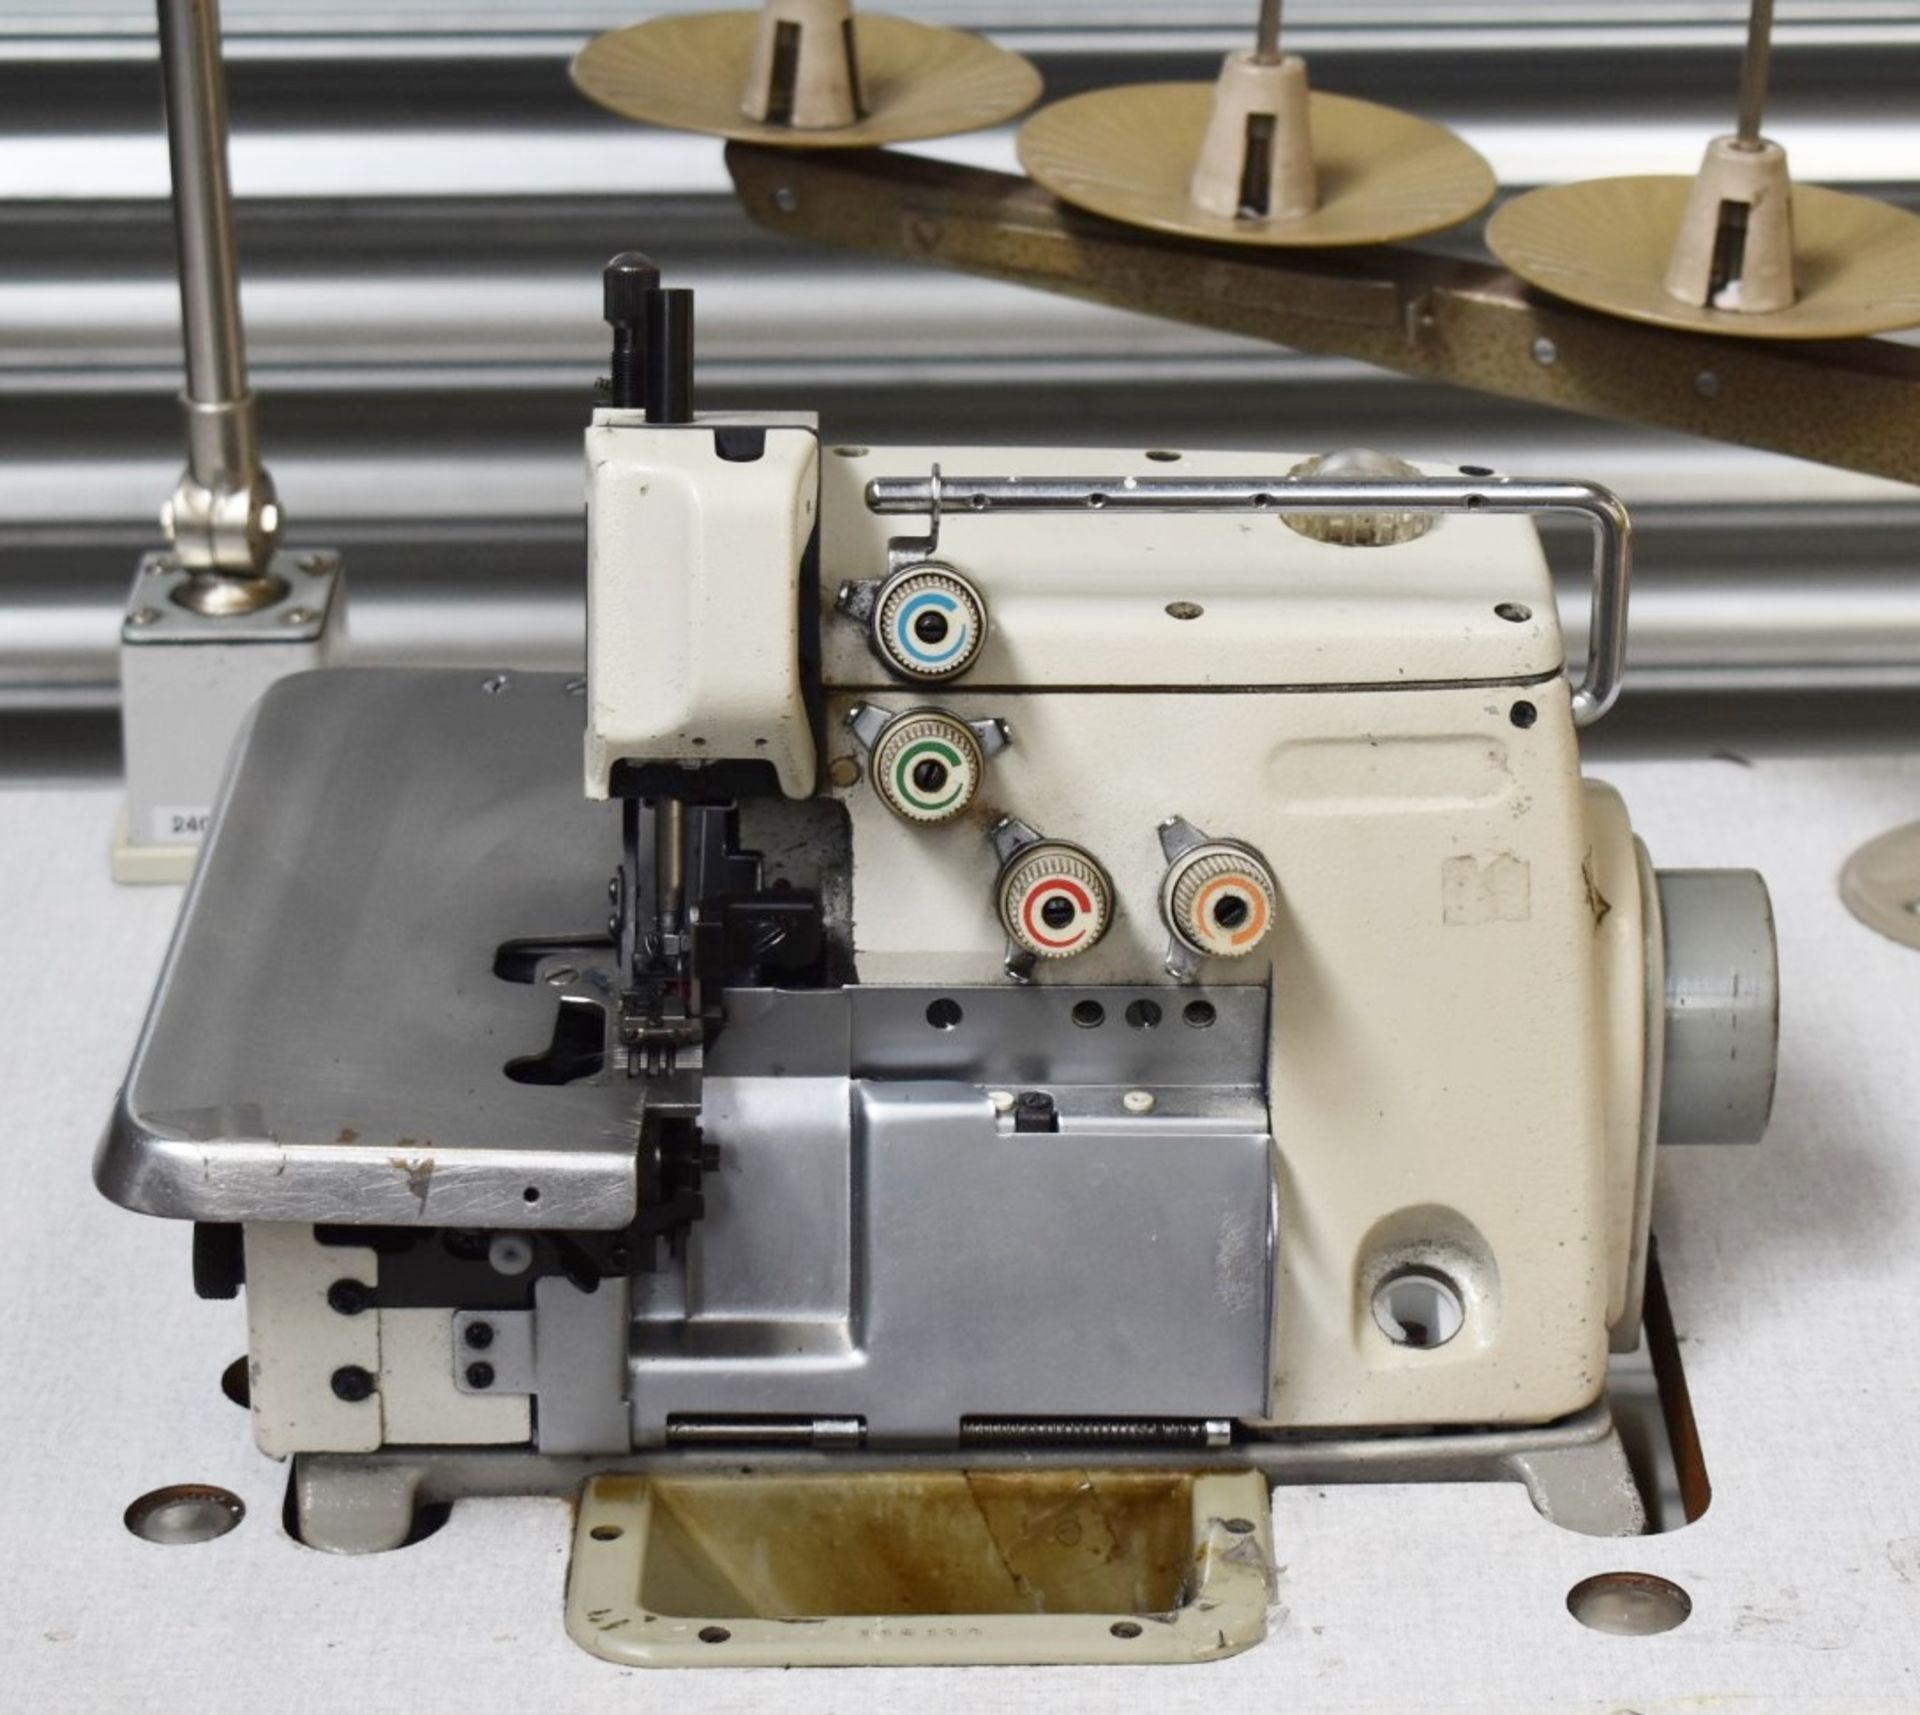 1 x Brother Overlock Industrial Sewing Machine - Model EF4-B531 - Image 4 of 27